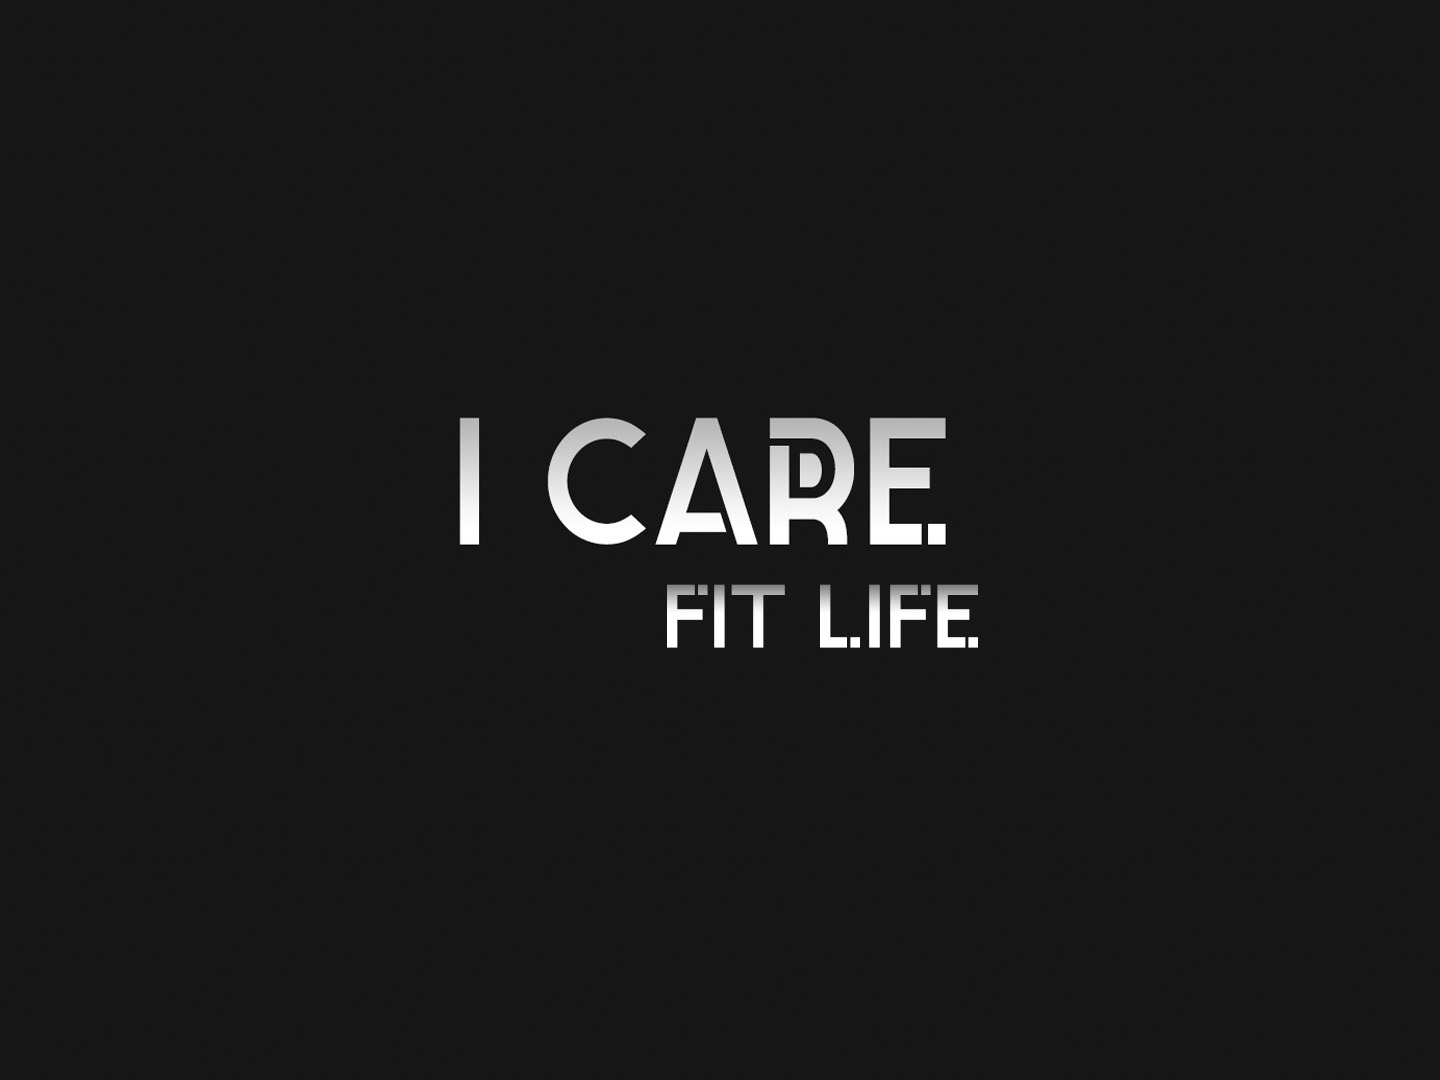 I Care Session, Fitness and healthy lifestyle, Nutrition